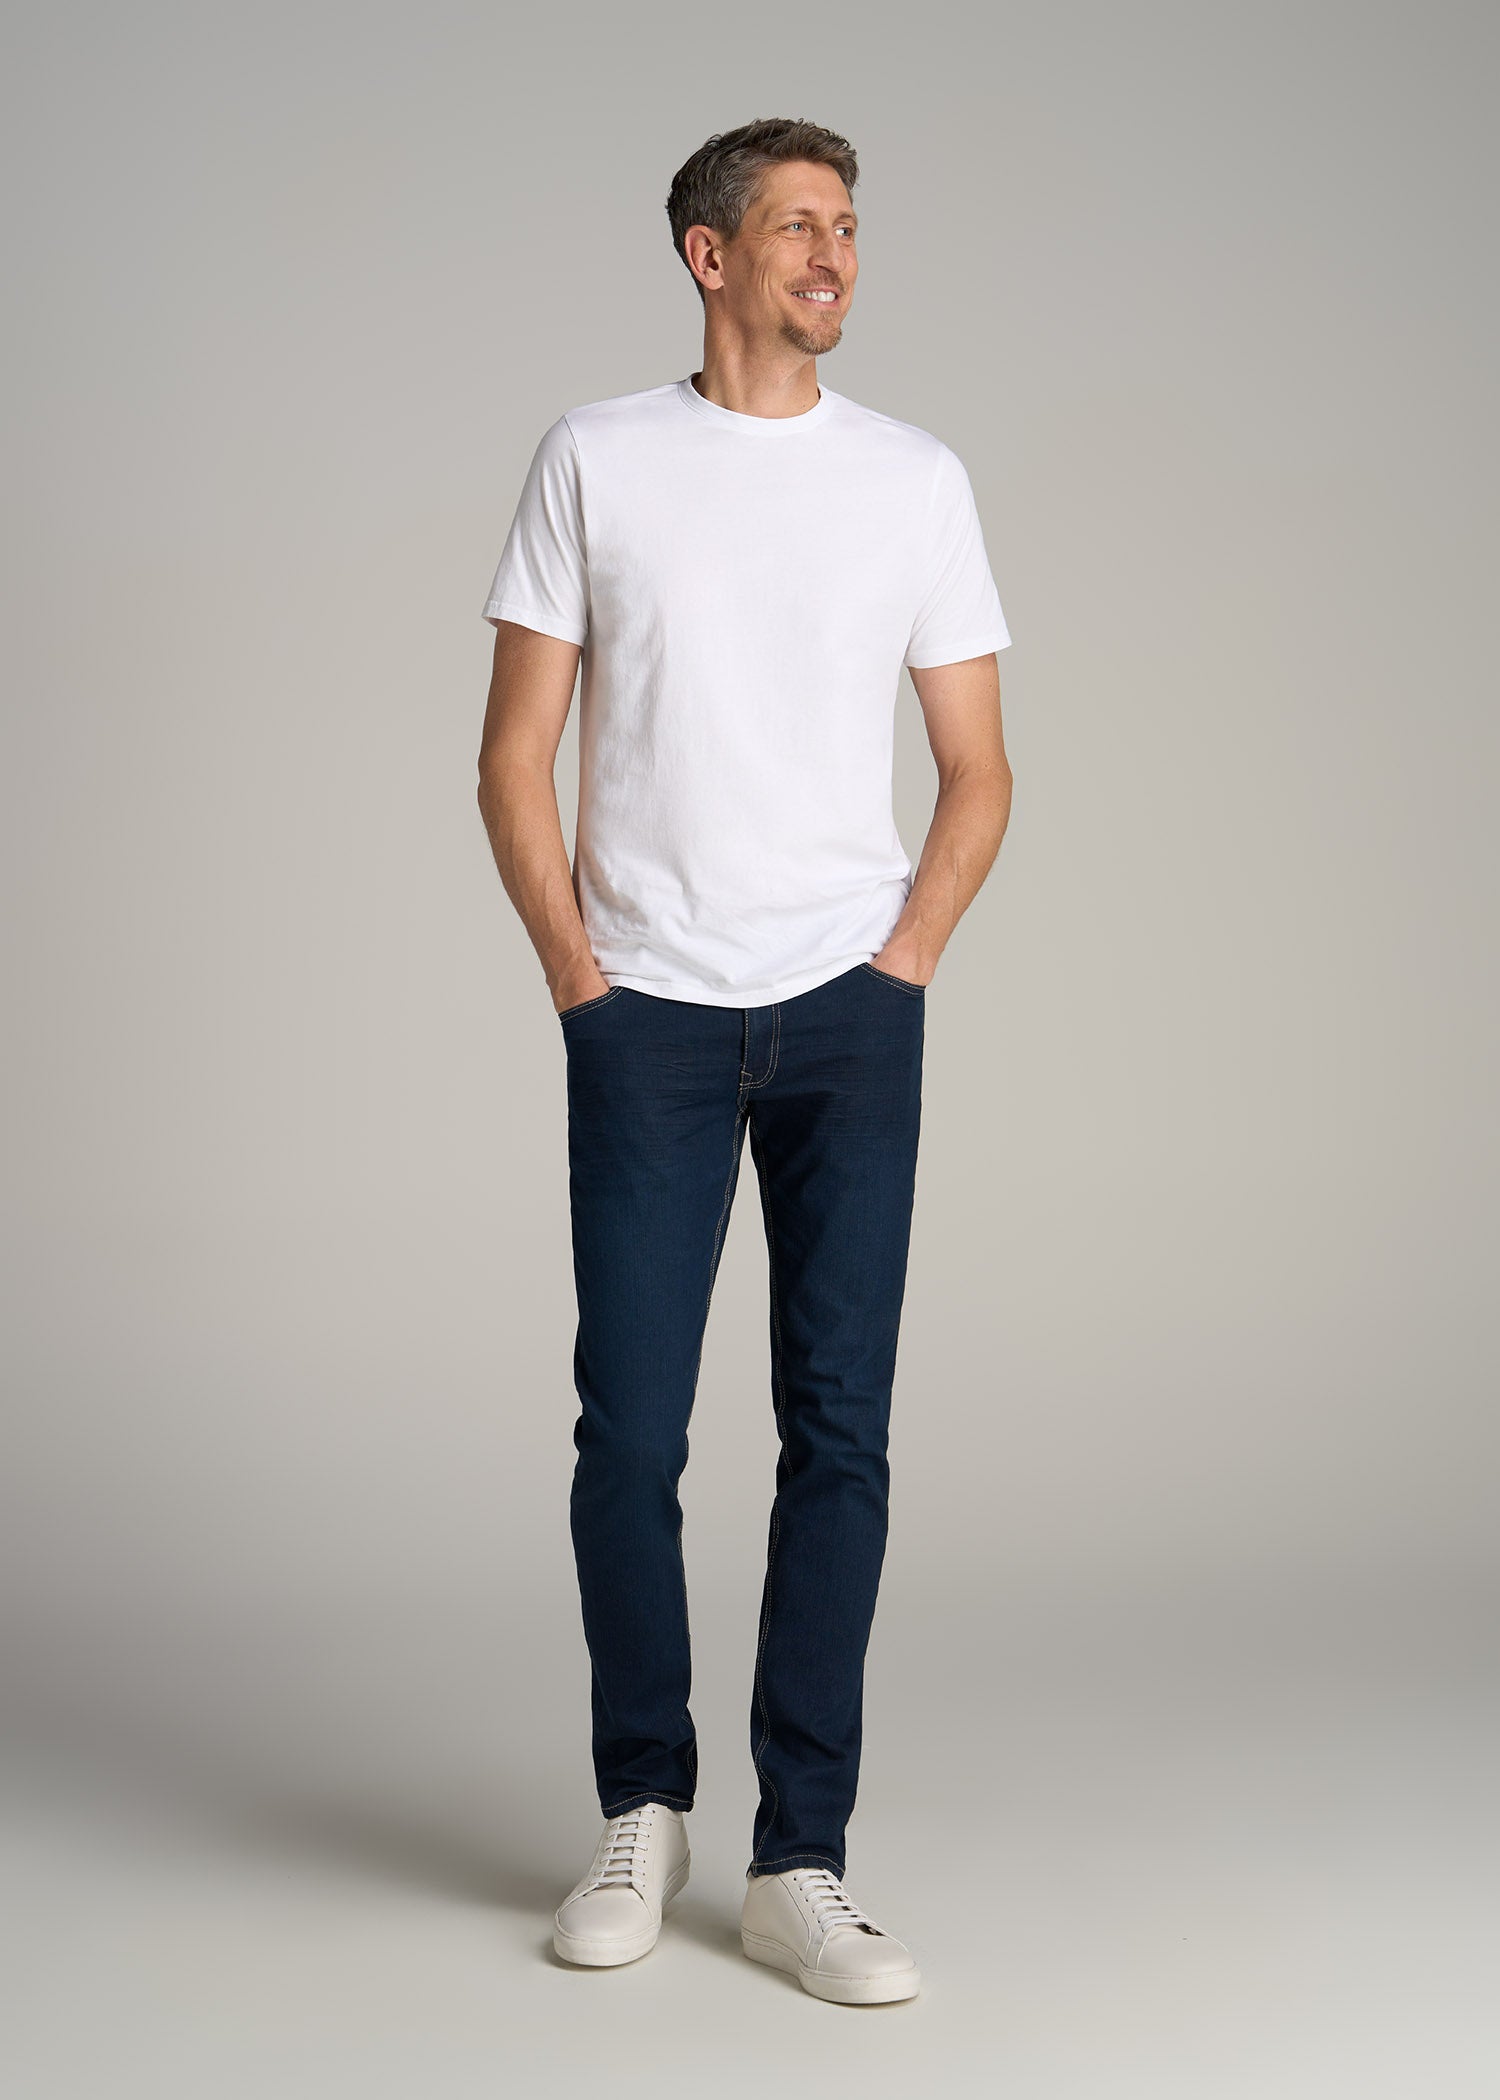 New Semi-tall Collection: Clothing Collection for Tall Men 6' - 6'3 –  American Tall